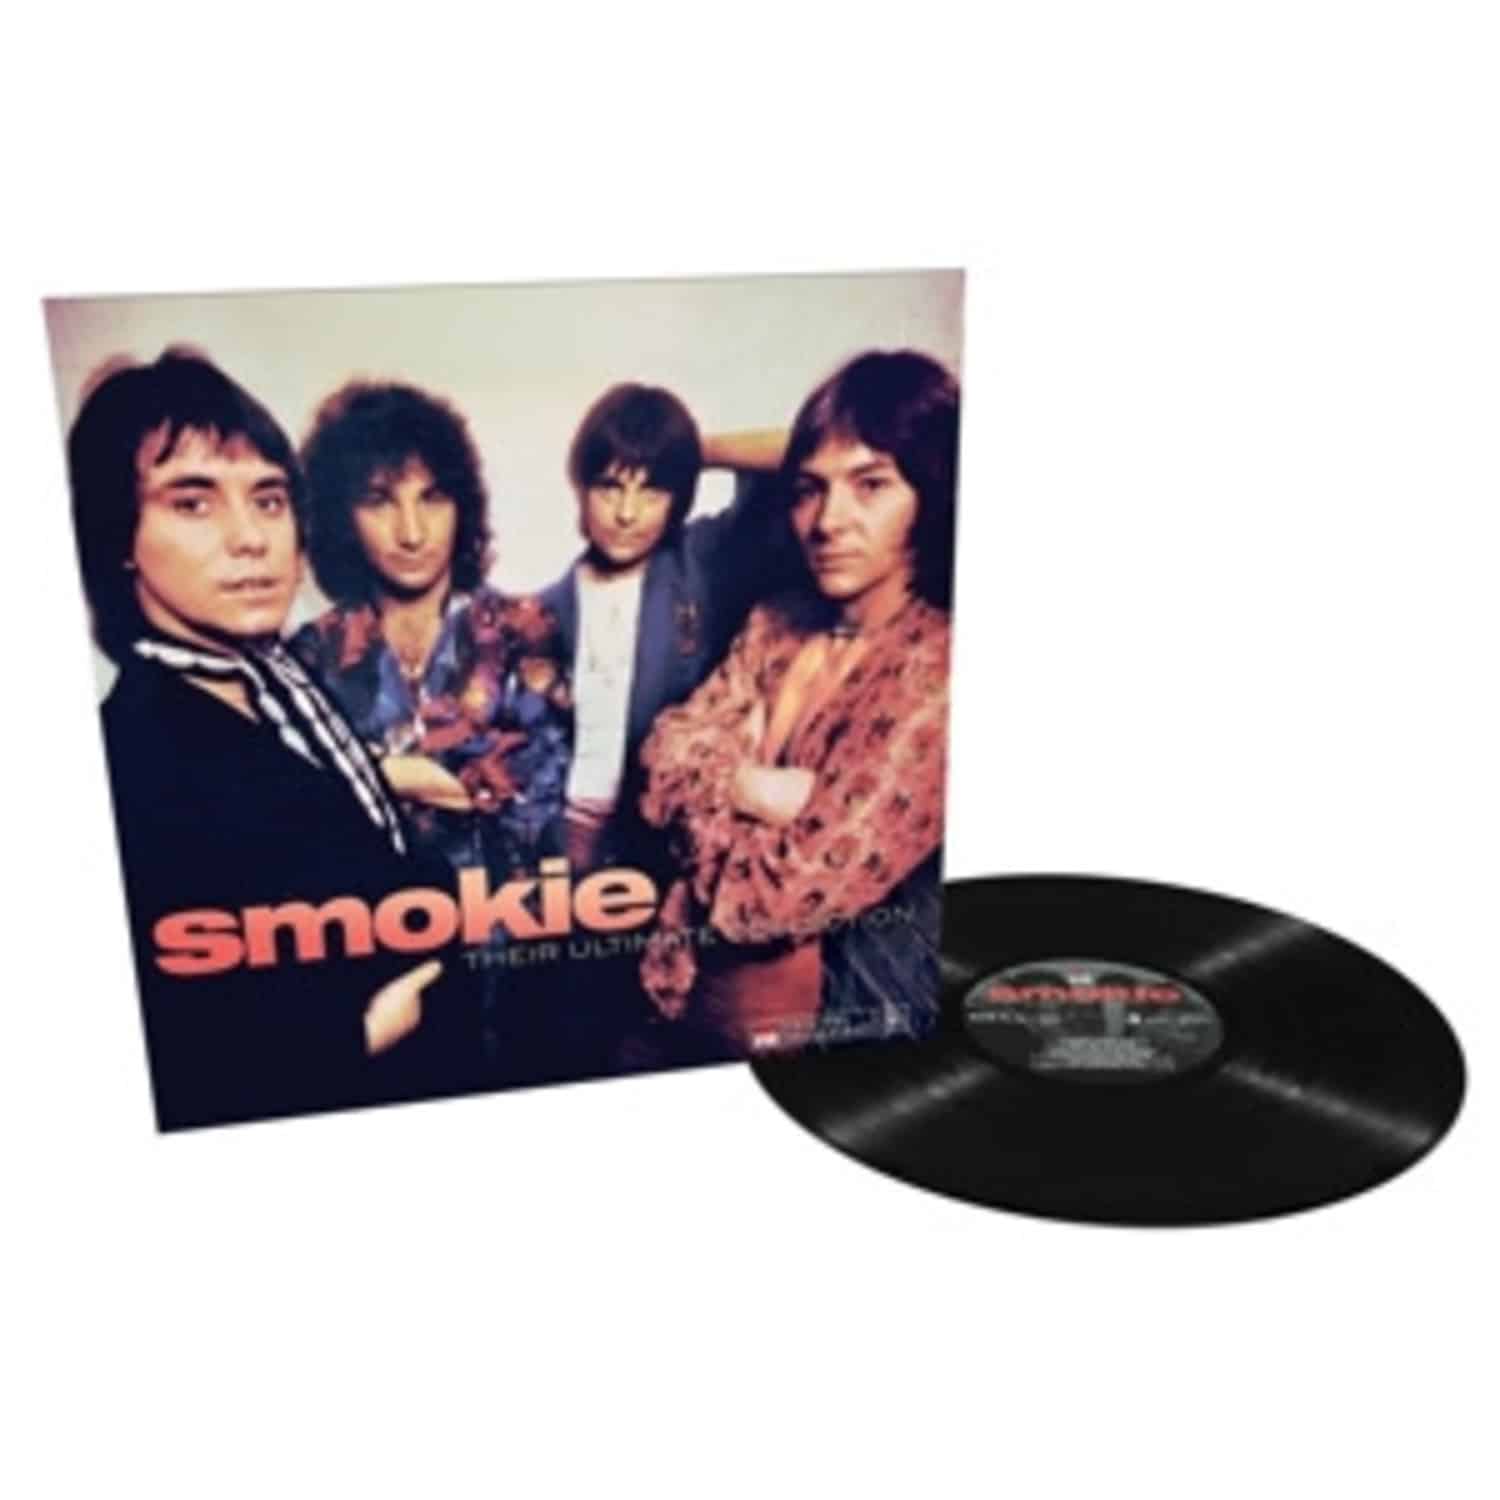 Smokie - THEIR ULTIMATE COLLECTION